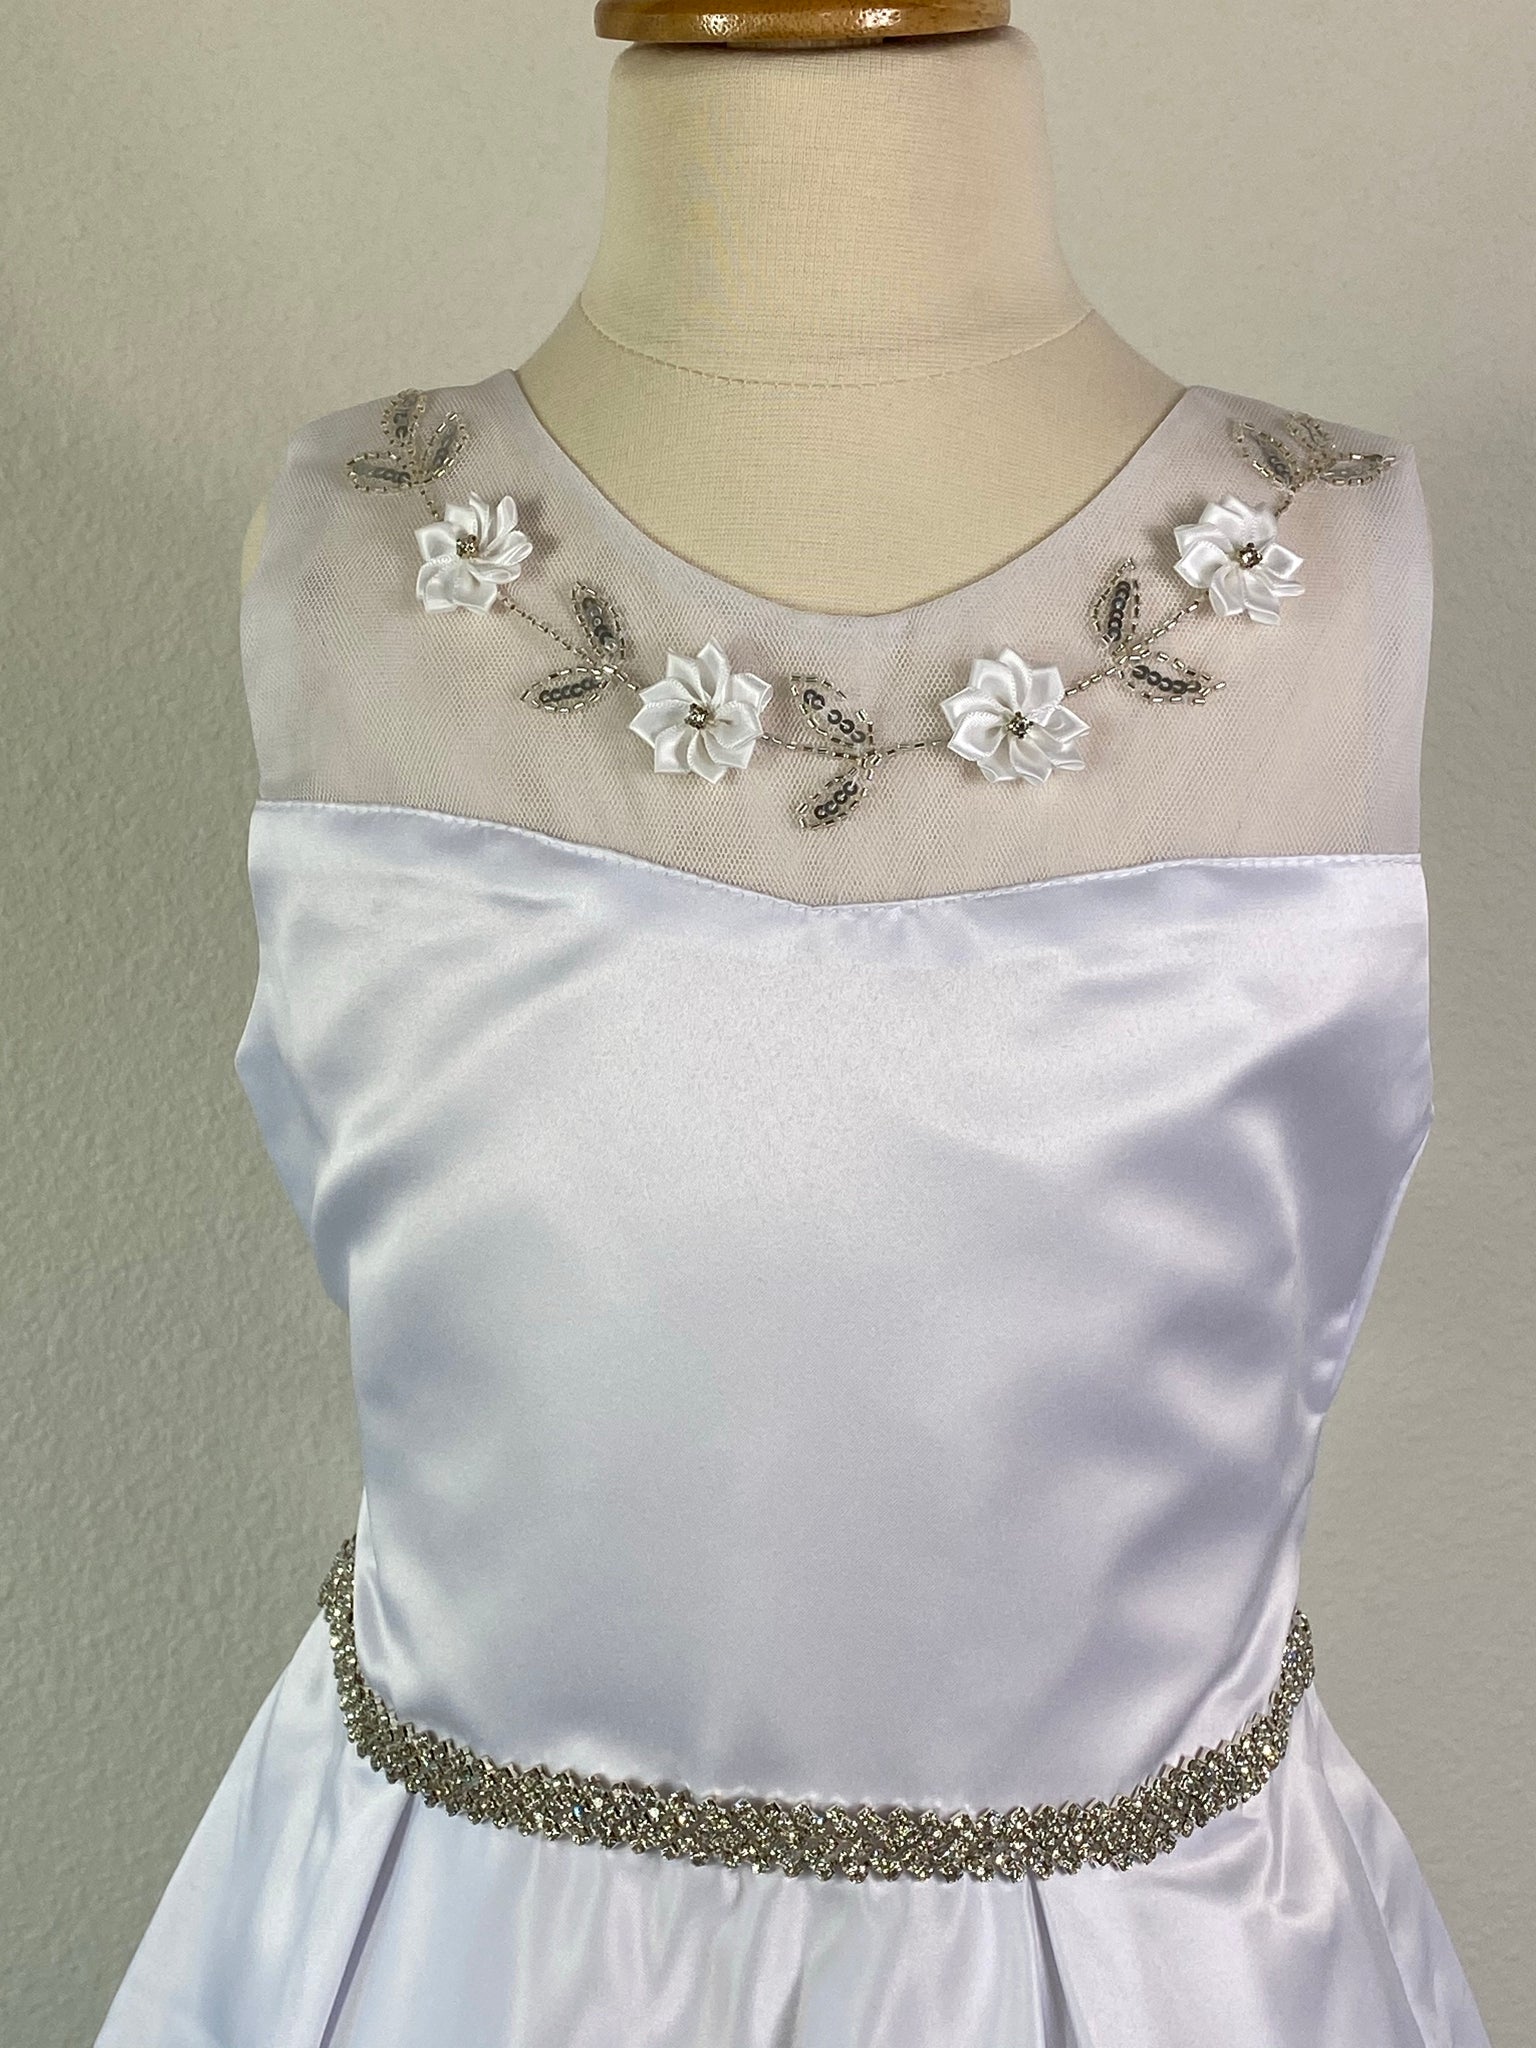 White, size 10 Satin and lace illusion bodice with flowers and beaded leaves Rhinestone belt Satin skirt Zipper Closure Satin ribbon for bow